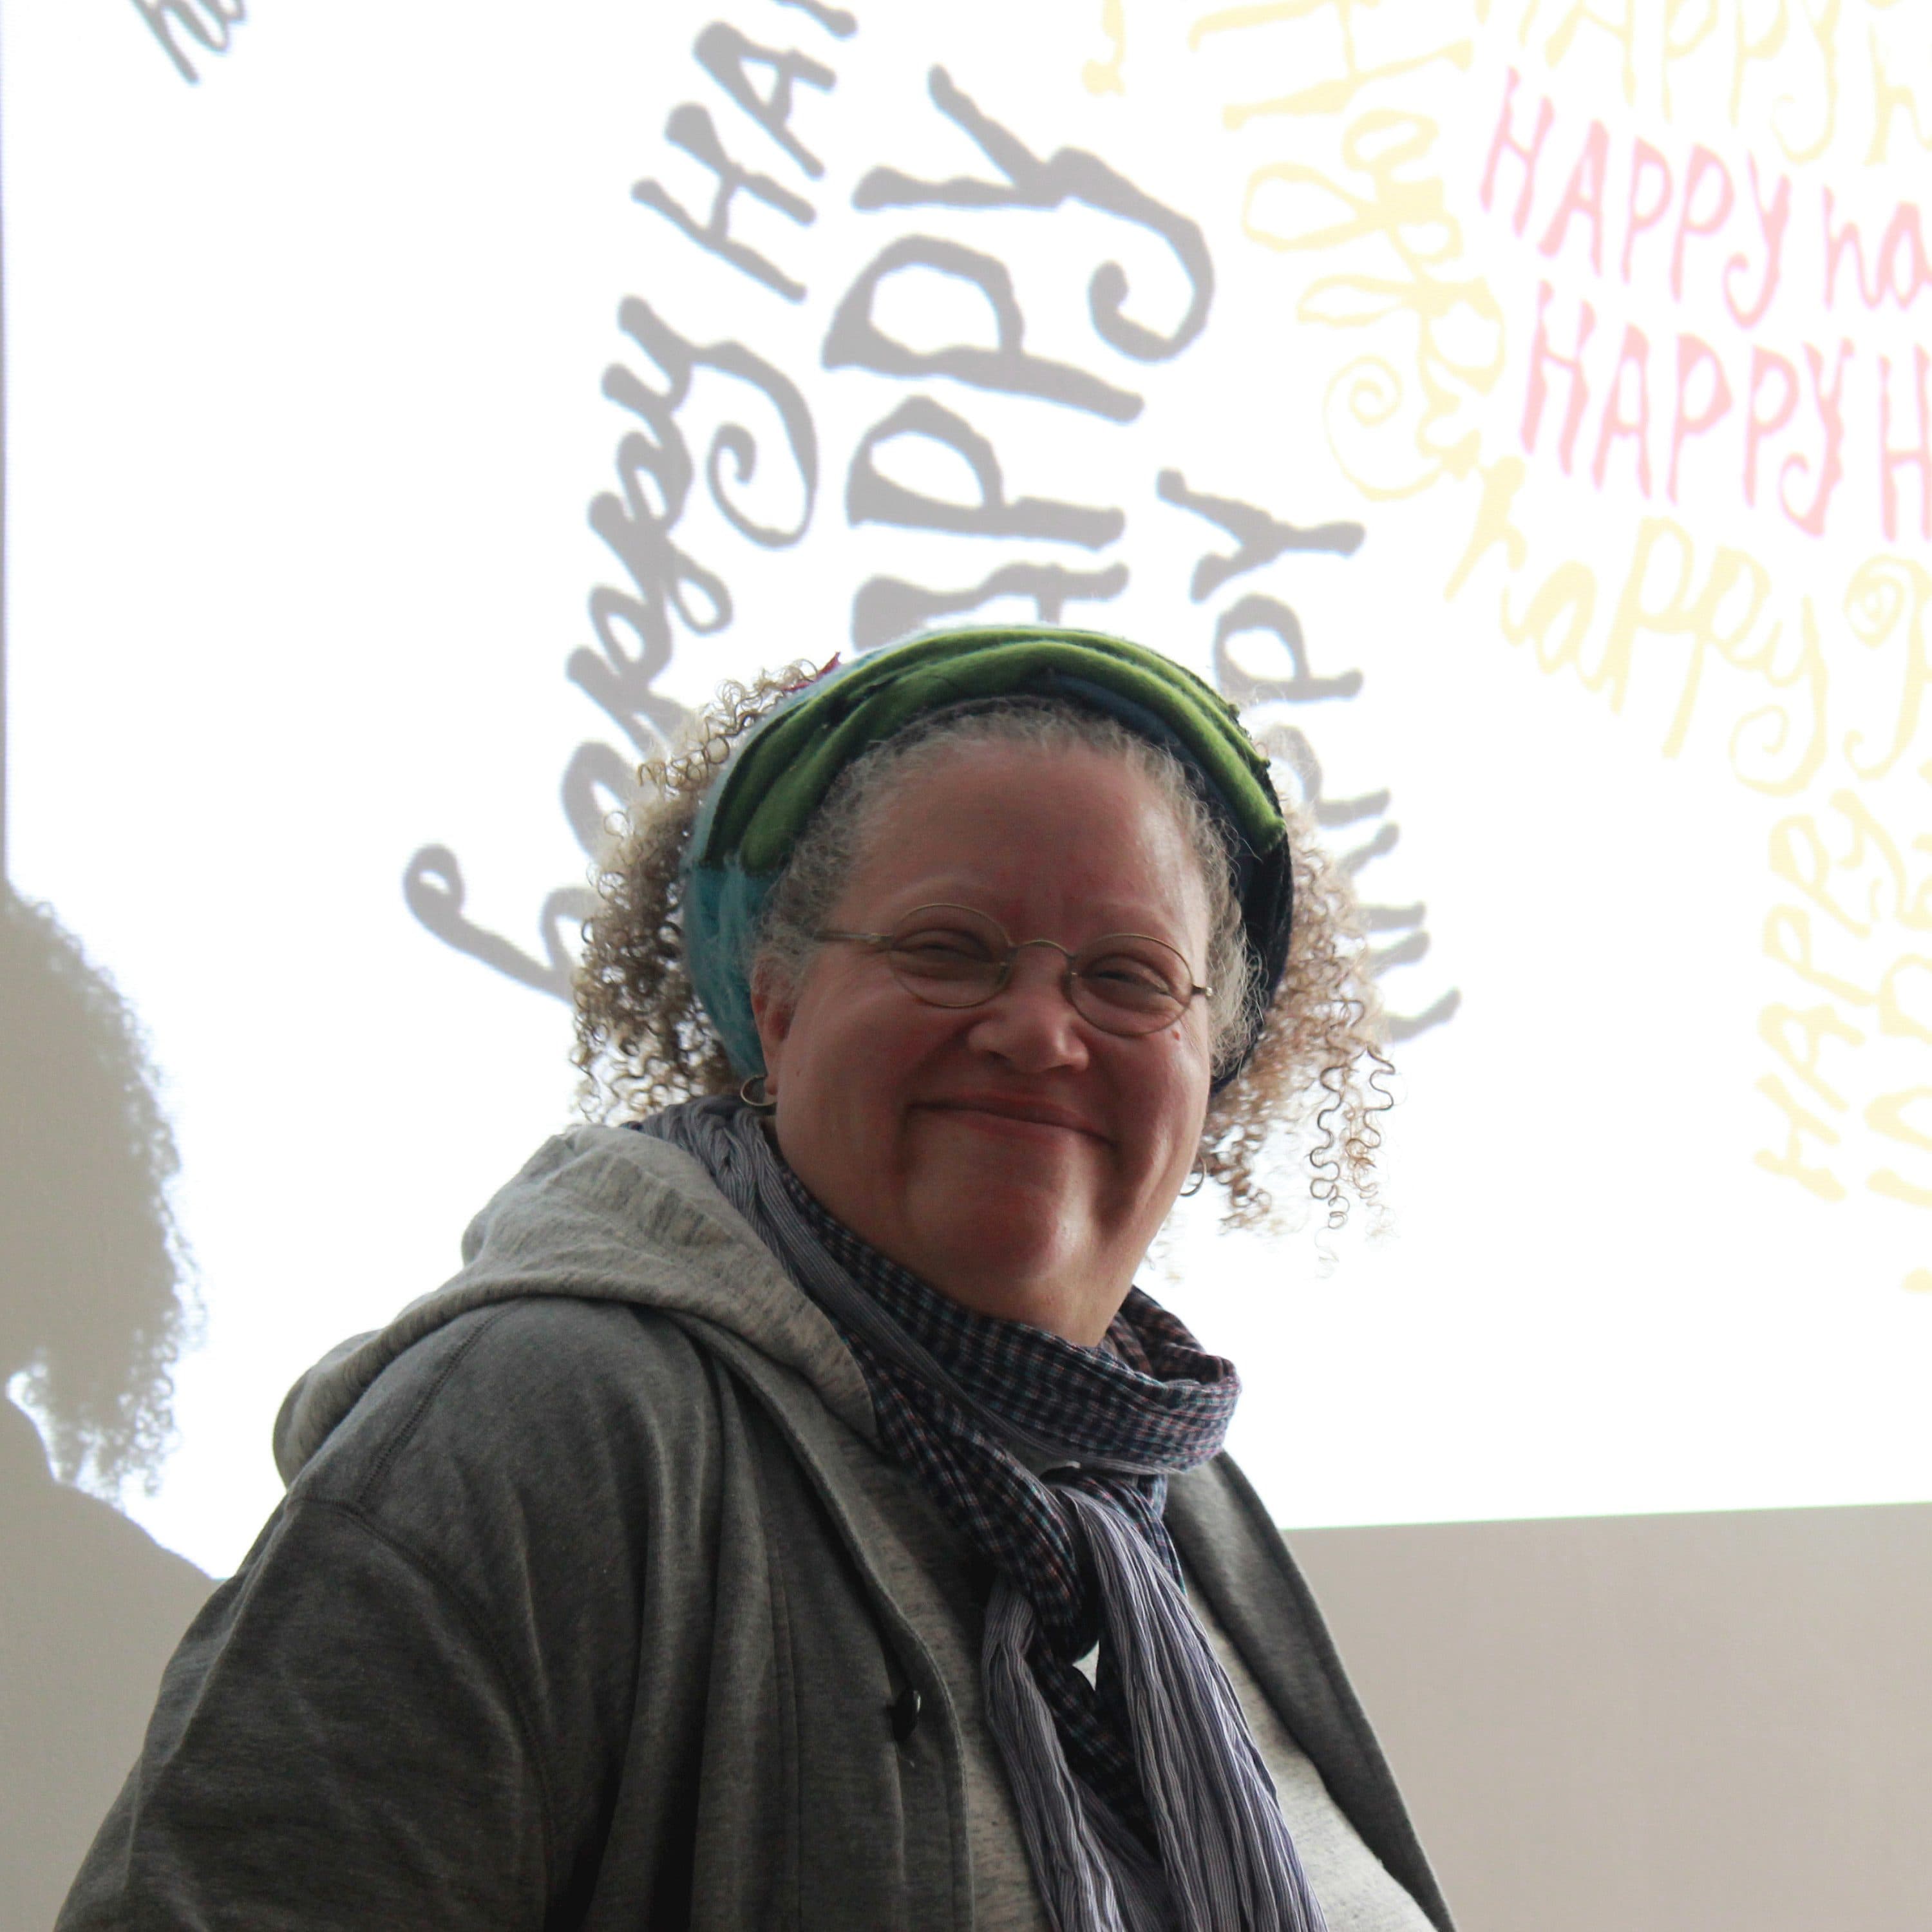 A person with curly hair, wearing glasses and a colorful headscarf, smiles while standing in front of a wall projection displaying the word "HAPPY" multiple times in various fonts and colors. The person is dressed in light-colored attire and a striped scarf.